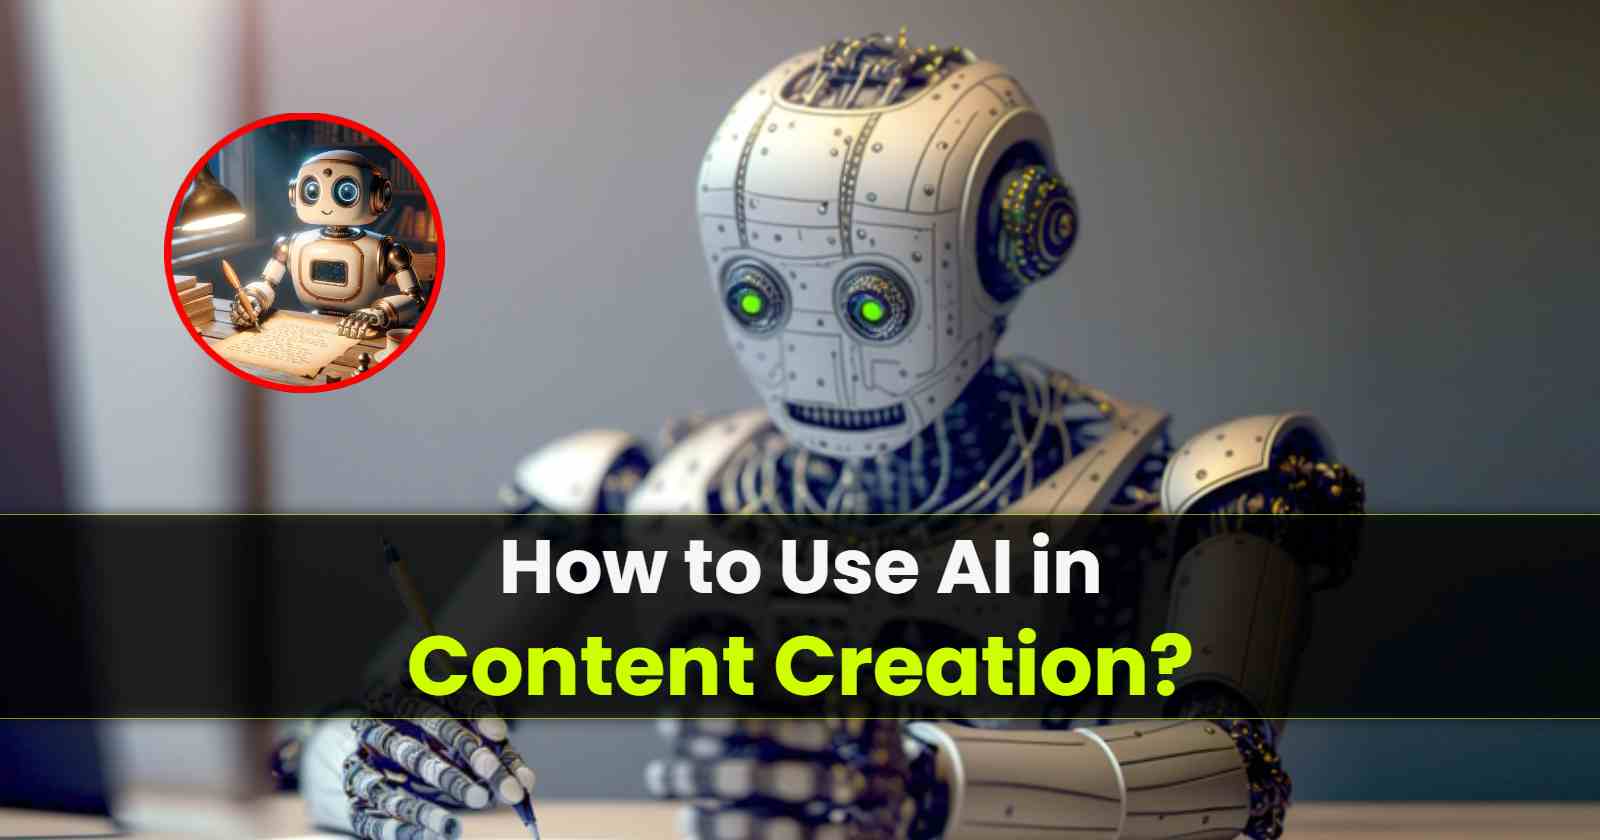 How to Use AI in Content Creation